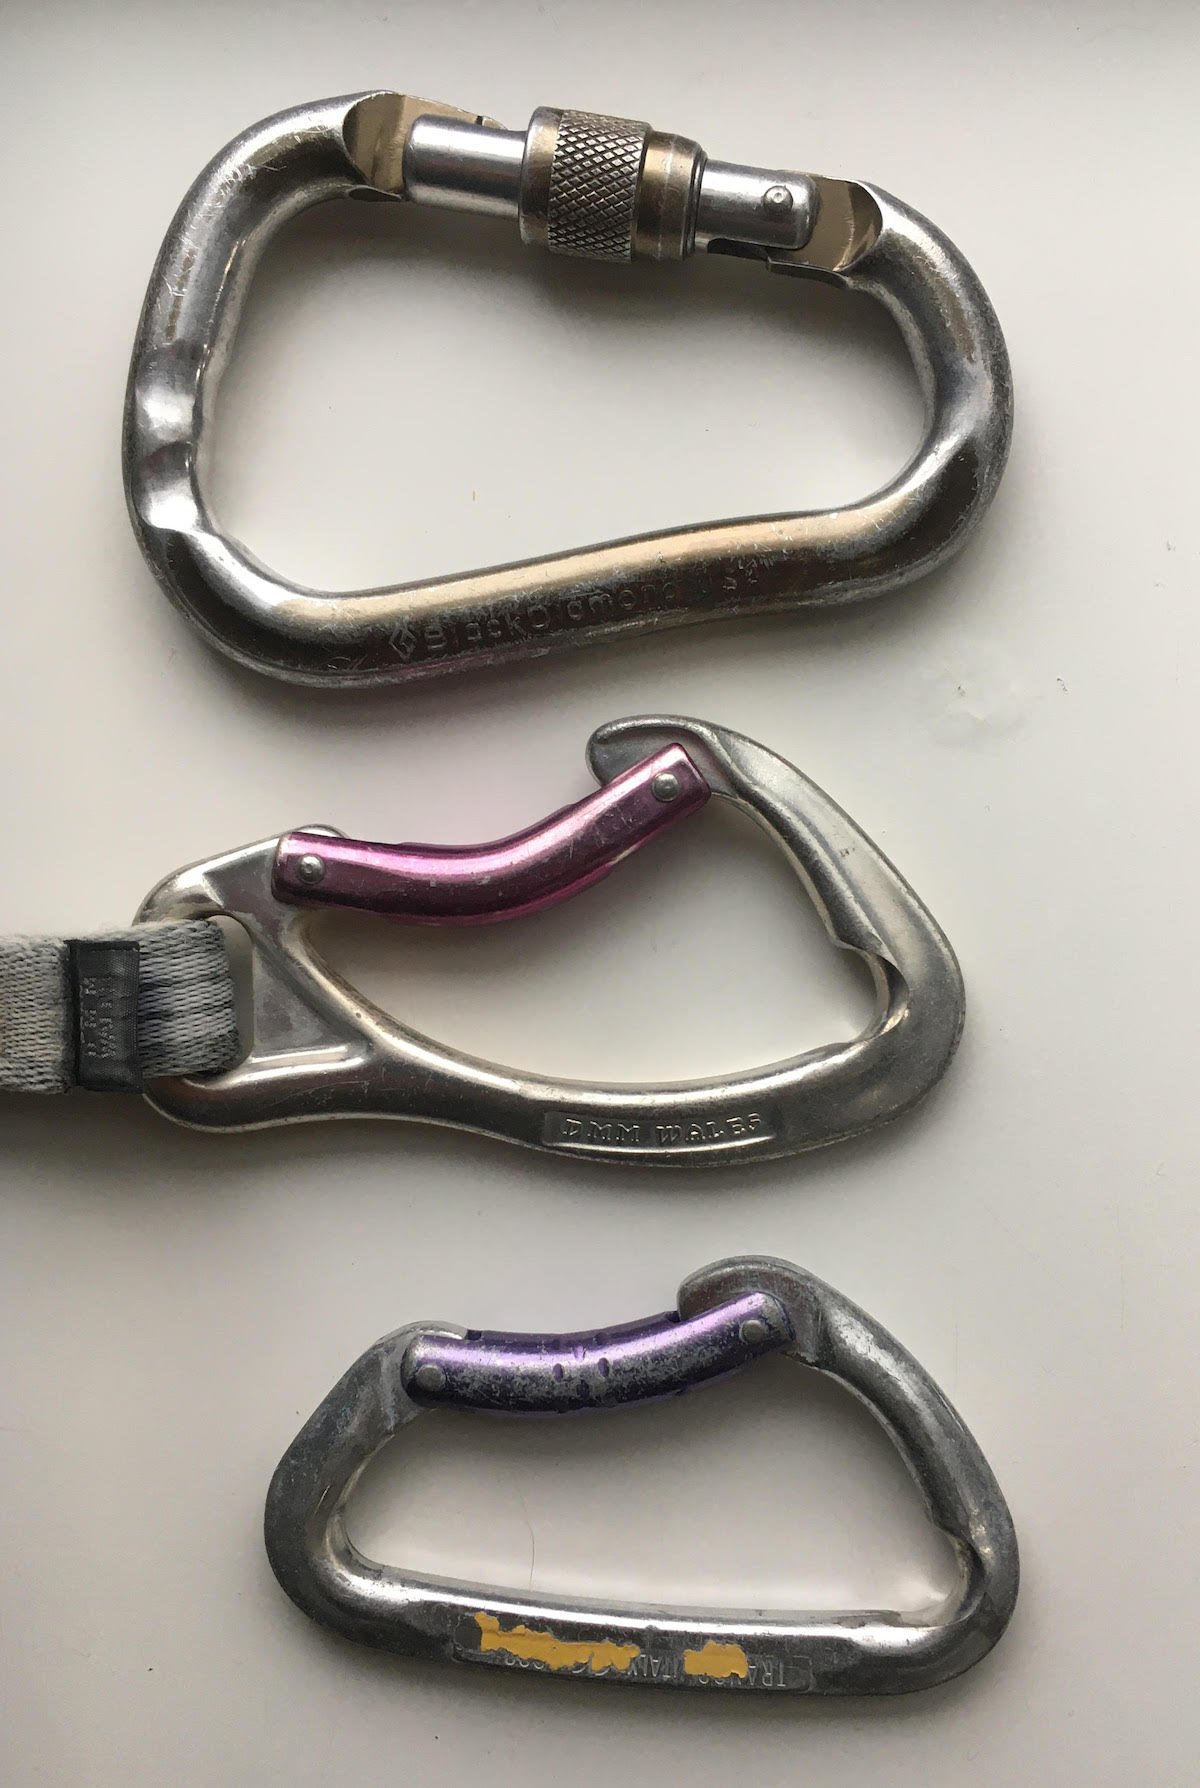 These carabiners were gouged by ropes. The top locking 'biner was used for a tube-style belay/rappel device, resulting in the double grooves. [Photo] Derek Franz